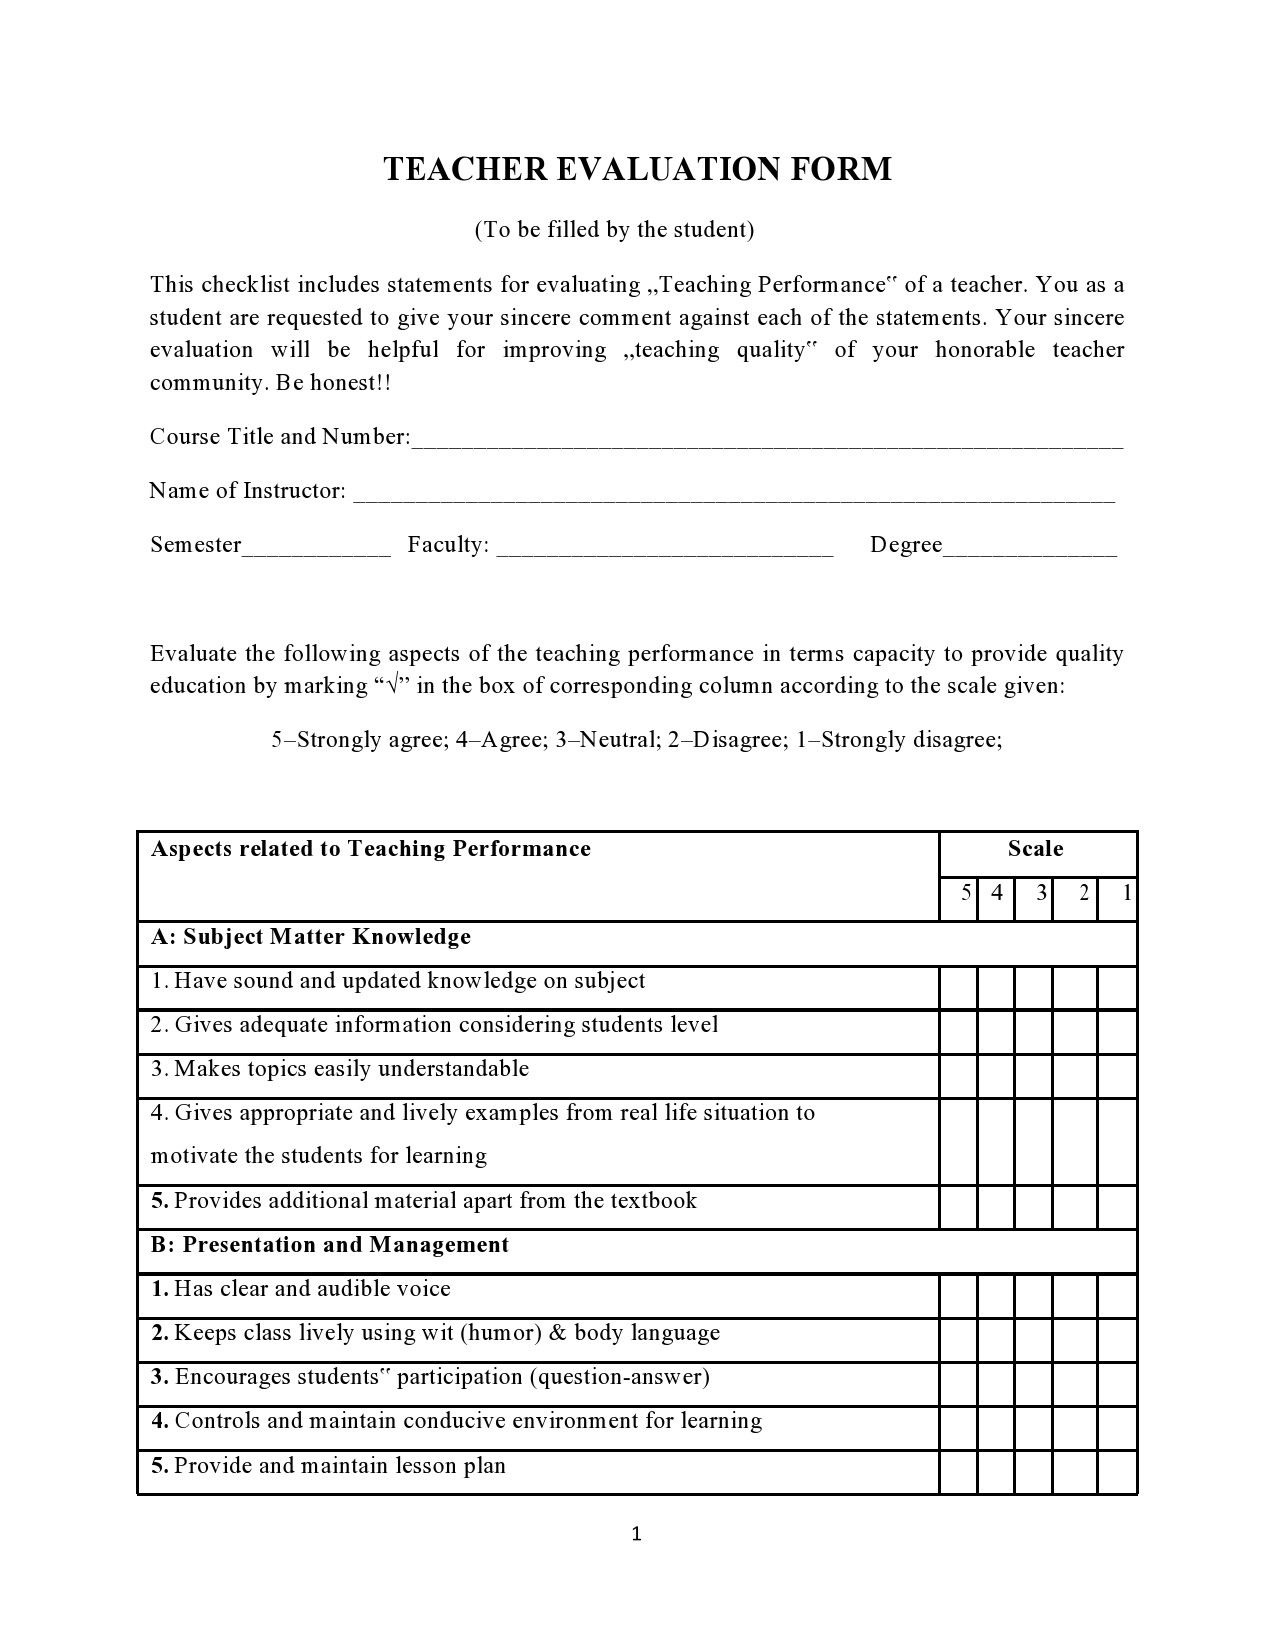 case study evaluation of data for teacher evaluation assignment